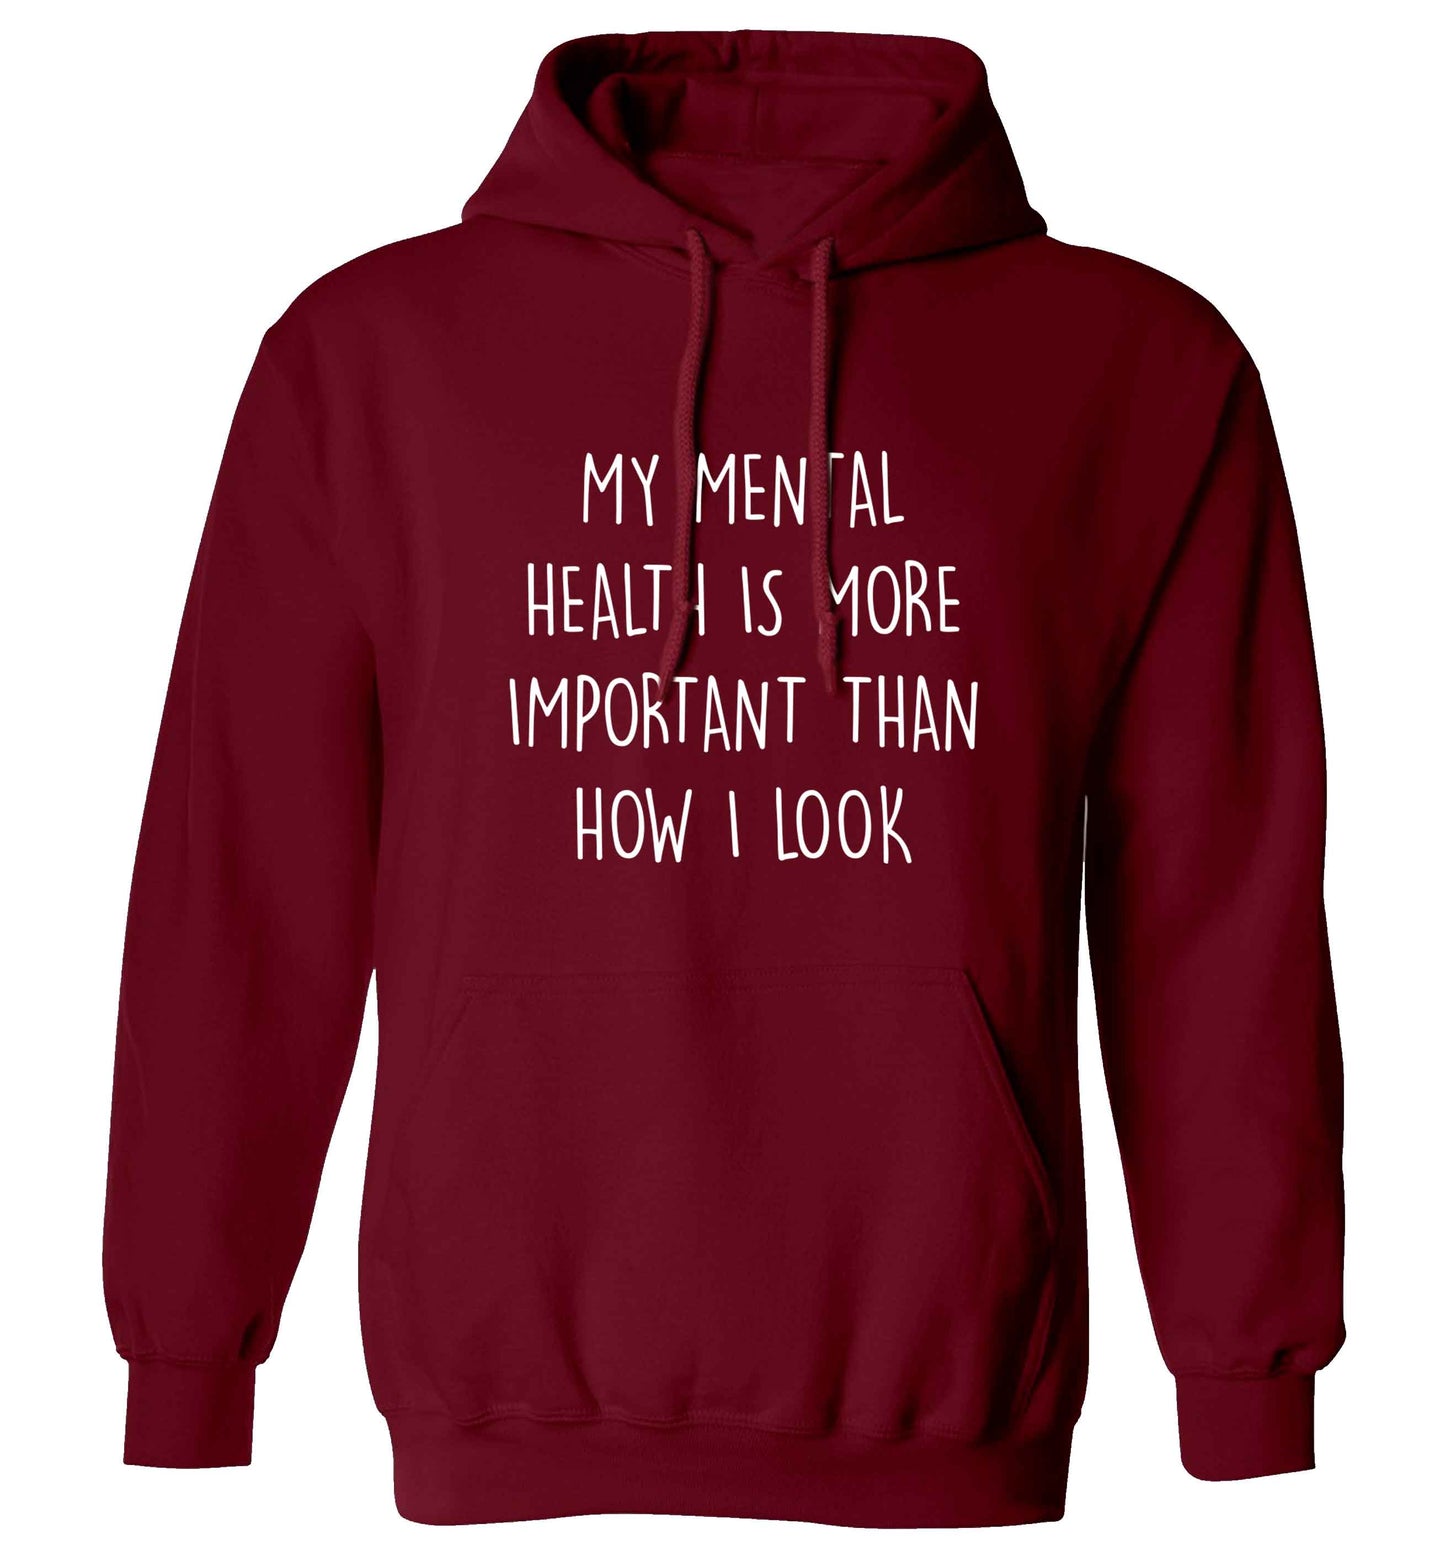 My mental health is more importnat than how I look adults unisex maroon hoodie 2XL